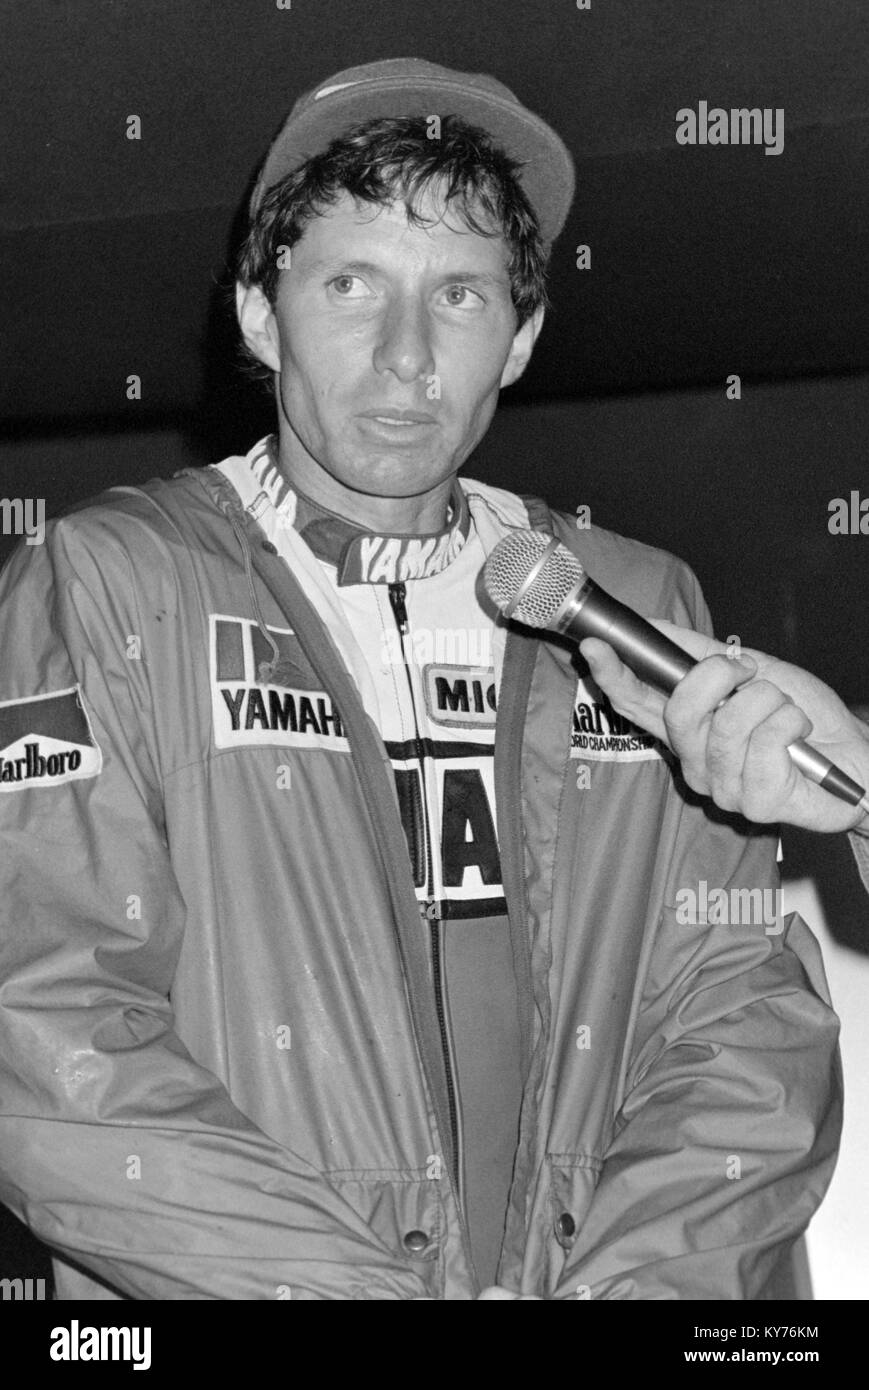 Eddie Lawson at the 1985 British motorcycle Grand Prix Moto GP, where he finished 2nd. Stock Photo